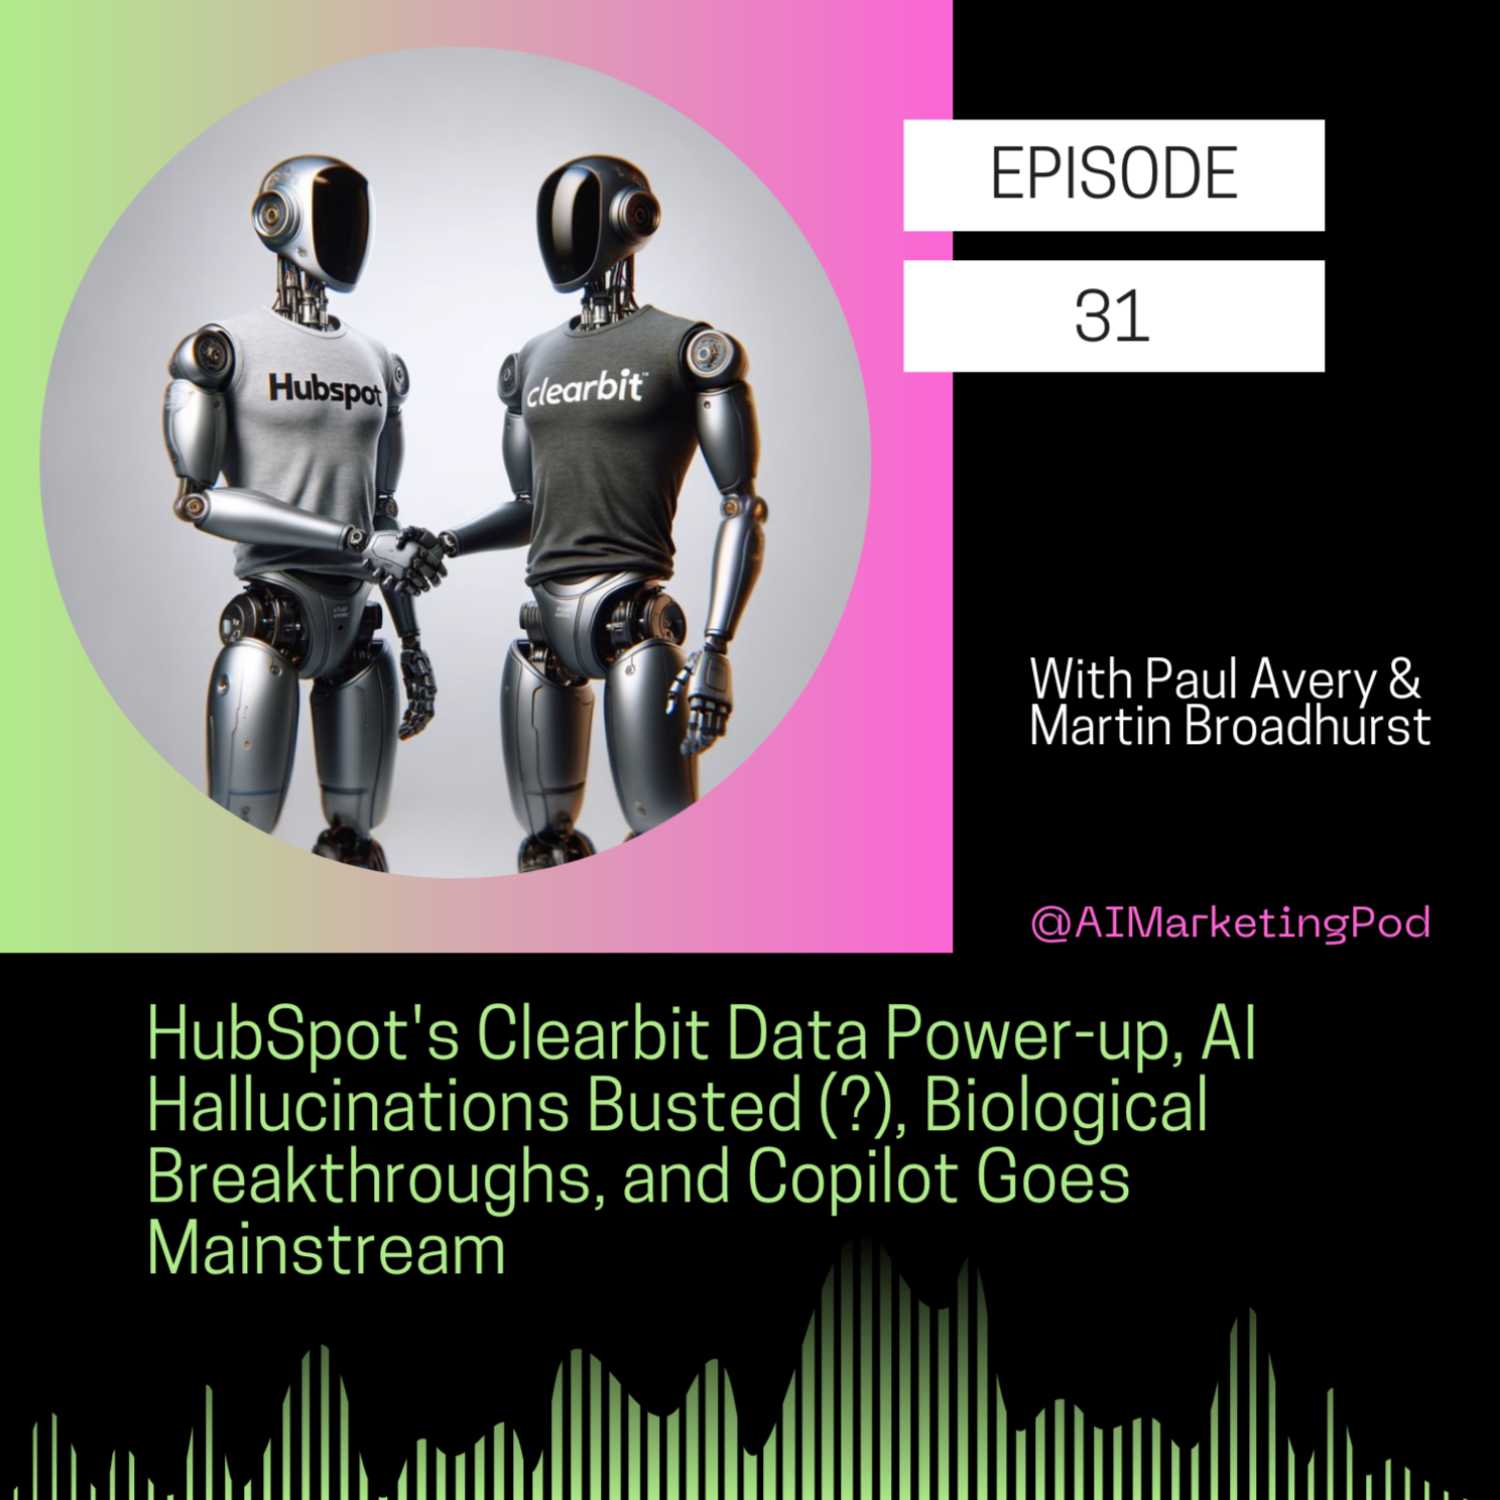 HubSpot's Clearbit Data Power-up, AI Hallucinations Busted (?), Biological Breakthroughs, and Copilot Goes Mainstream